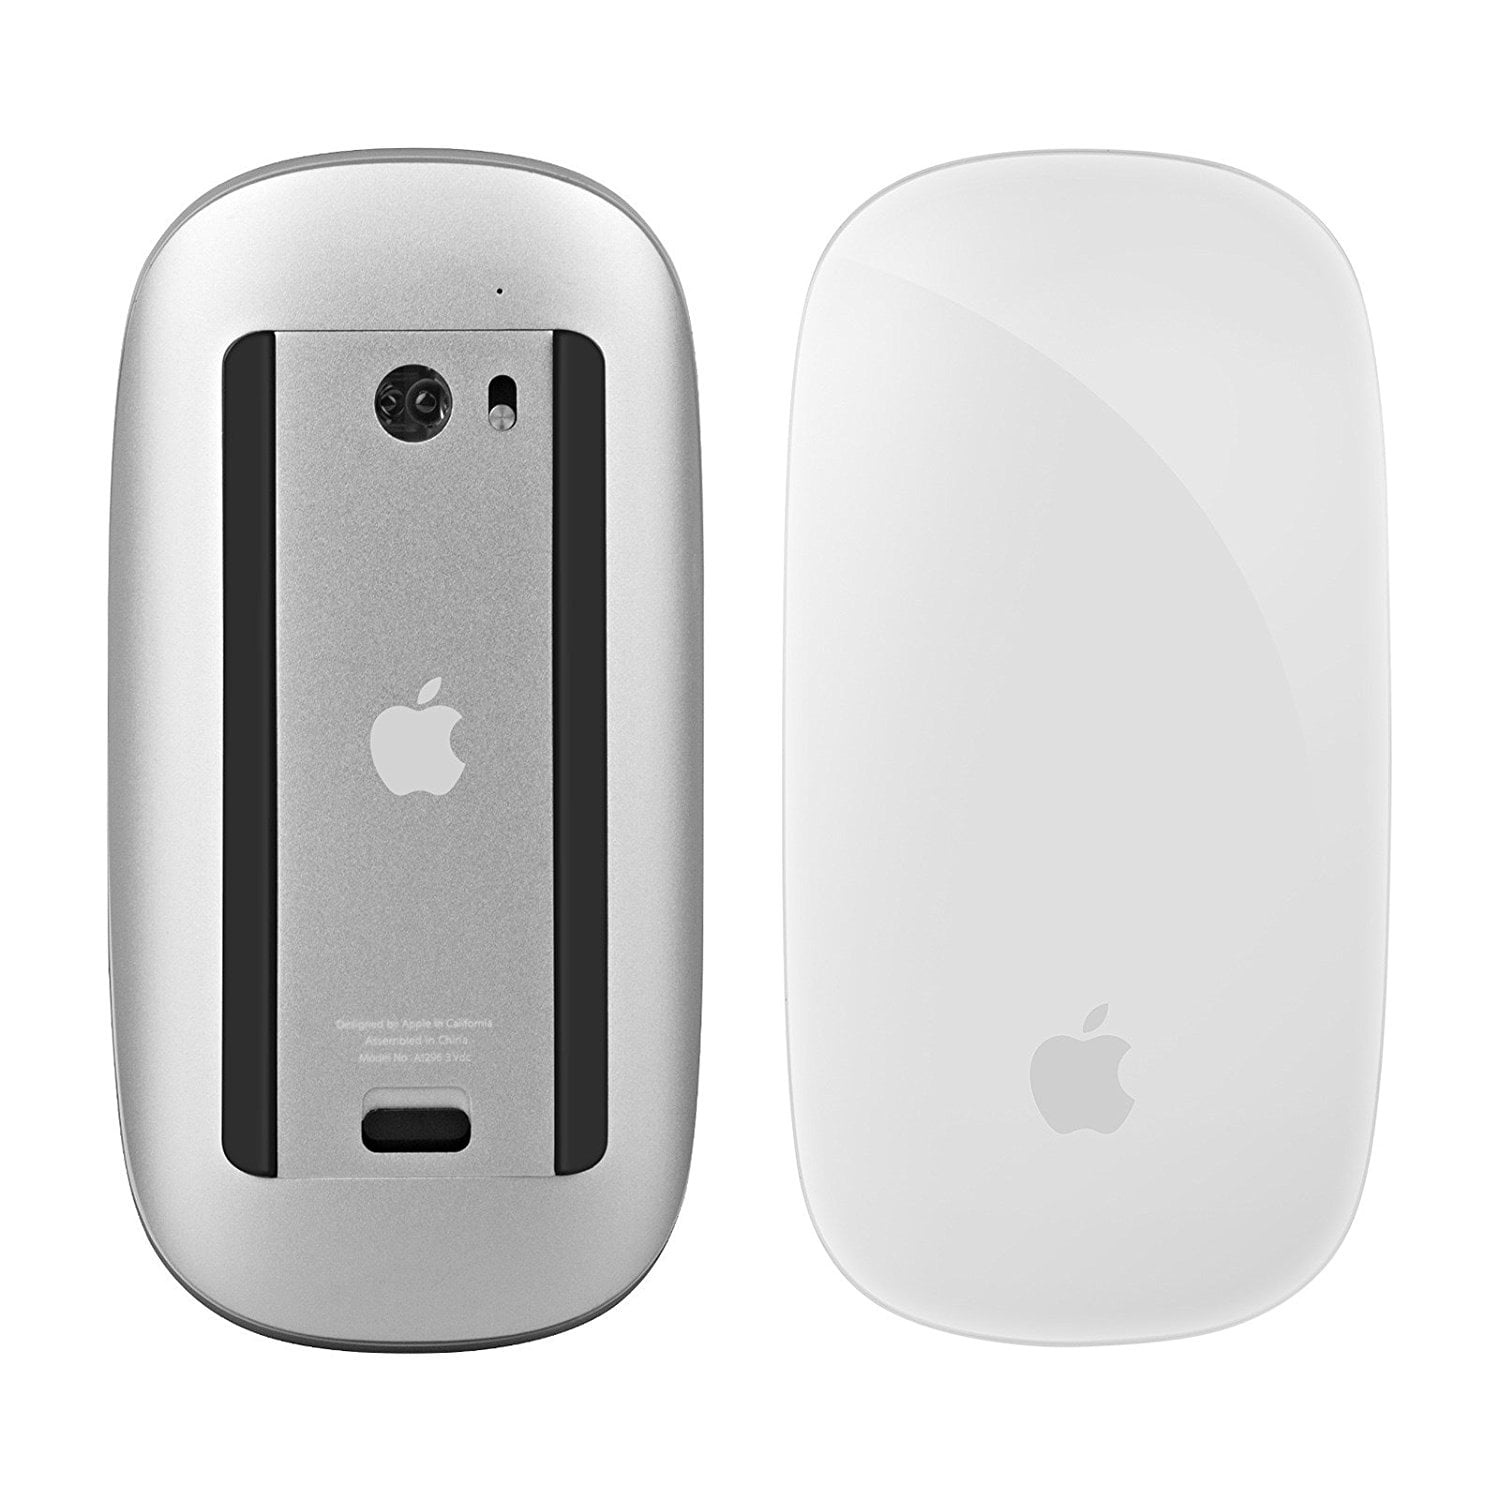 Restored Apple Magic A1296 - Wireless Bluetooth White Laser (Refurbished) MB829LL/A Mouse